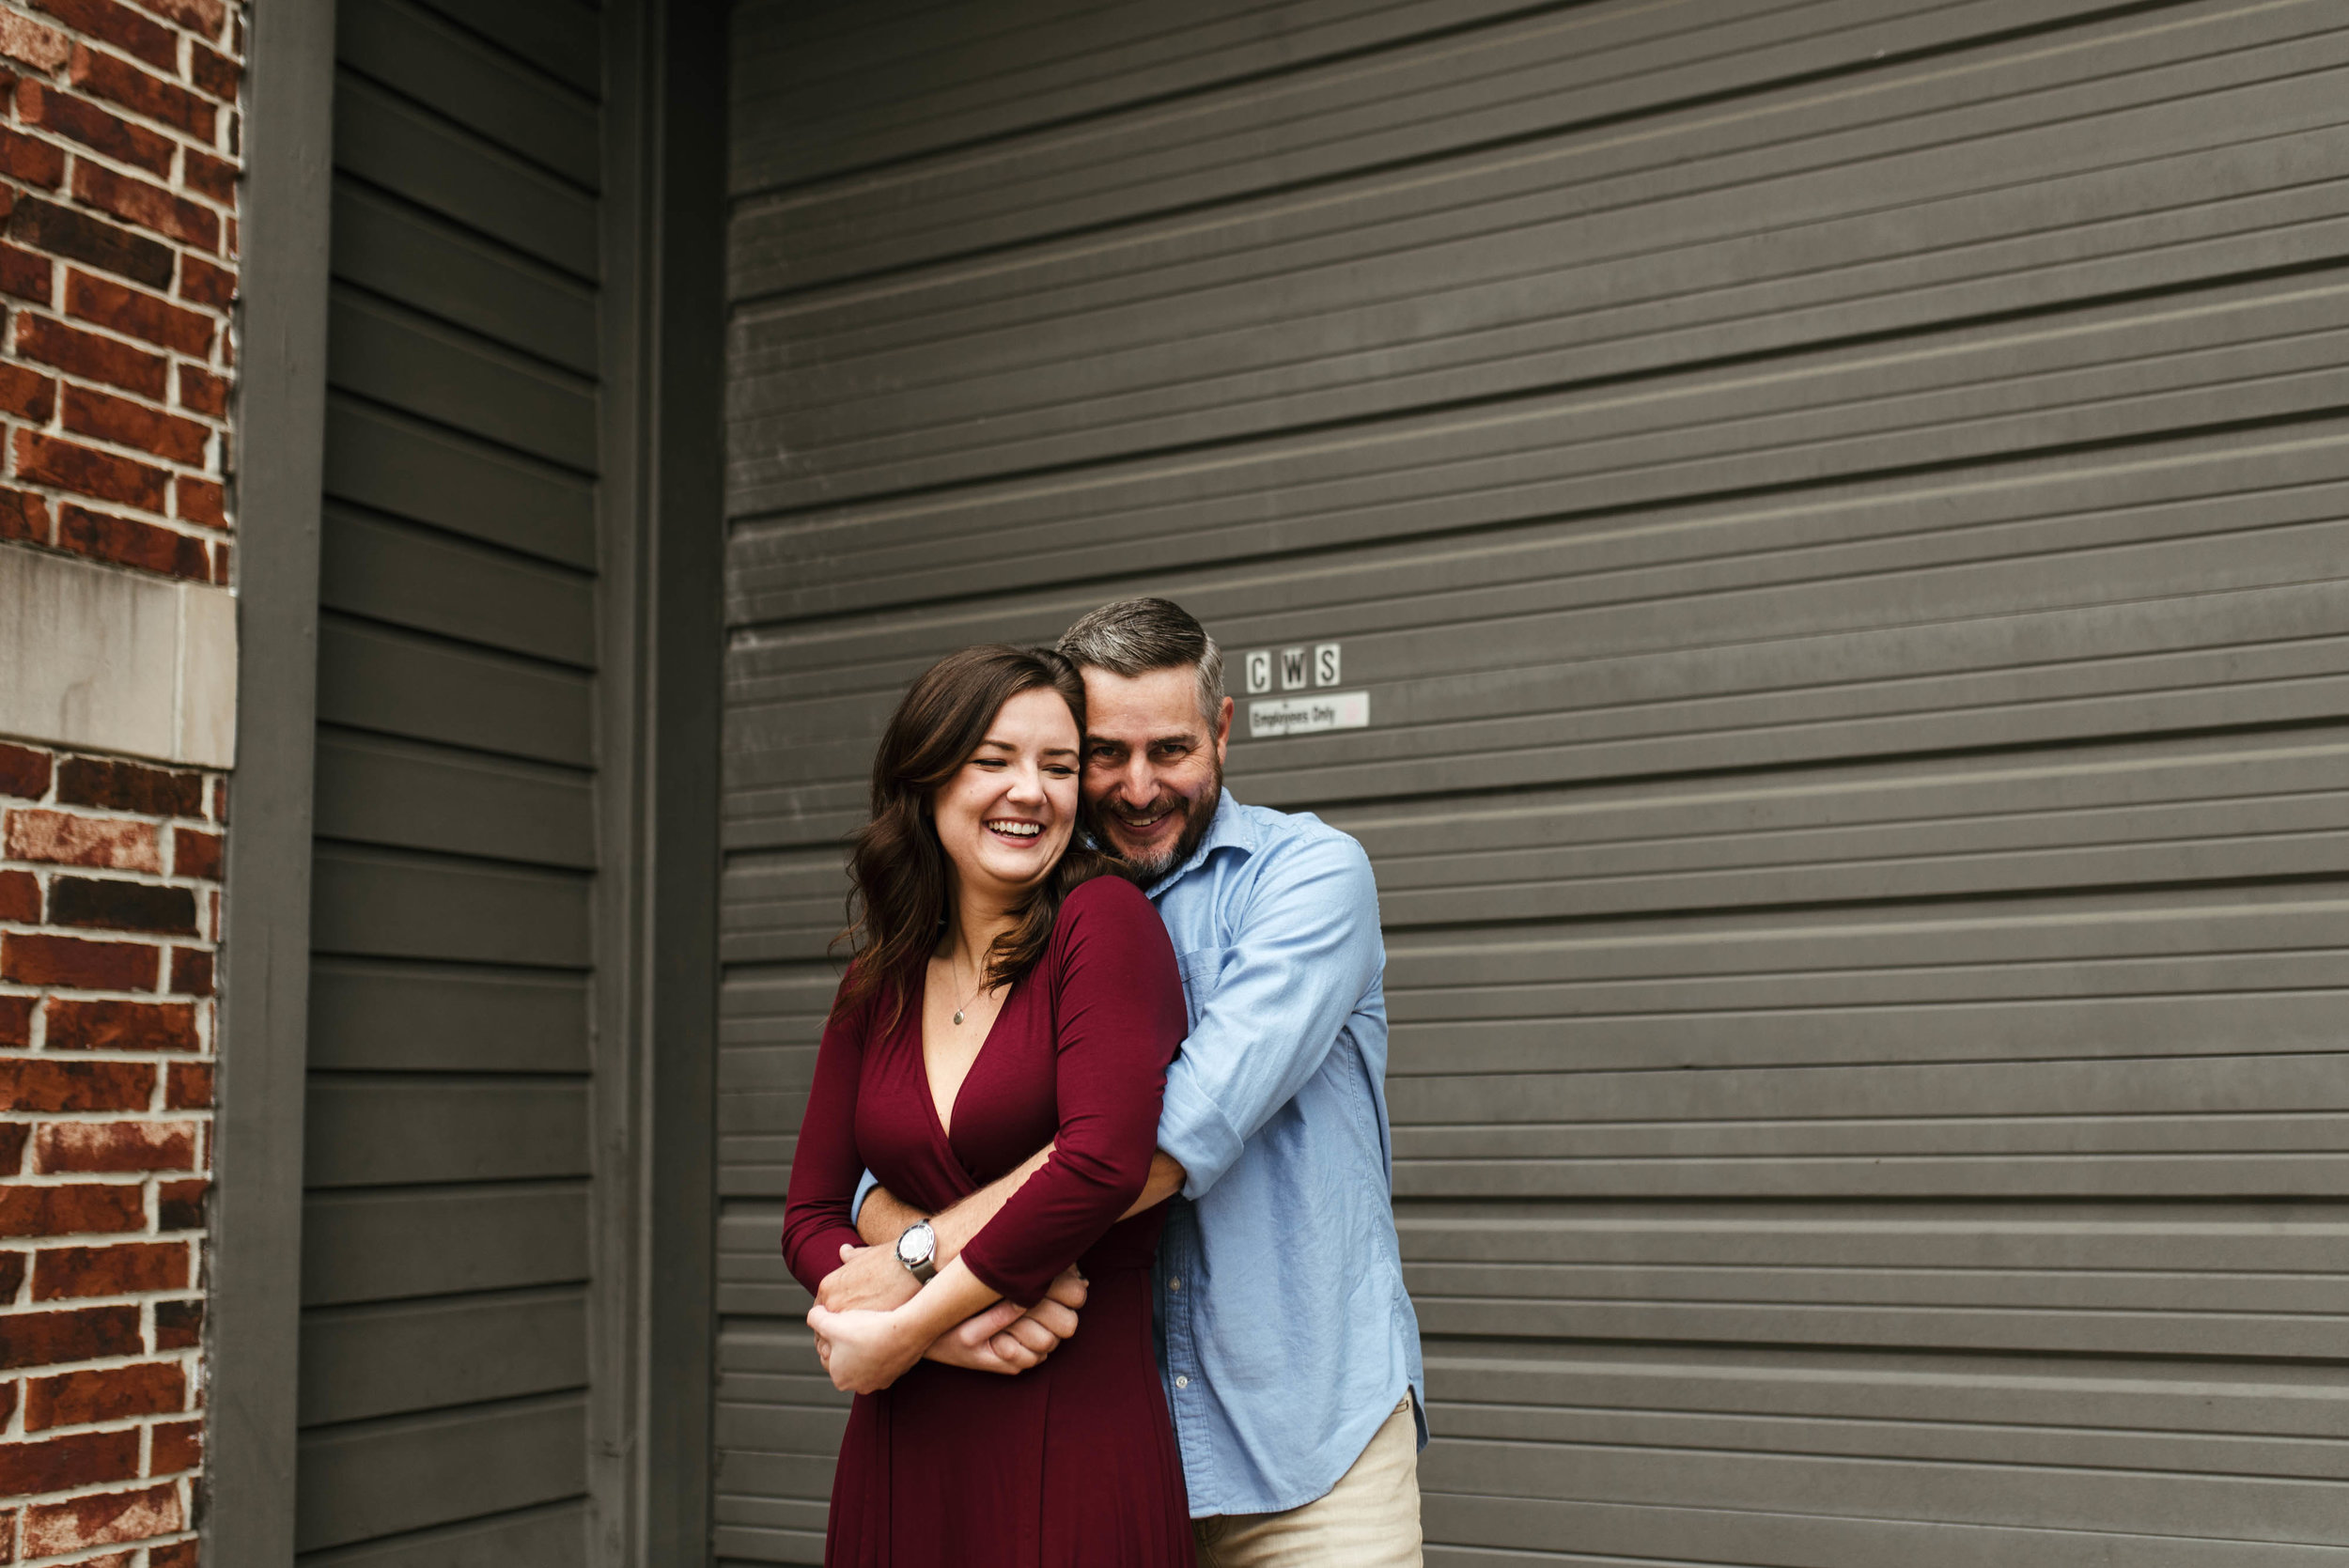  east end engagement session, houston, tx | Fort Worth photographer | www.jordanmitchellphotography.com 